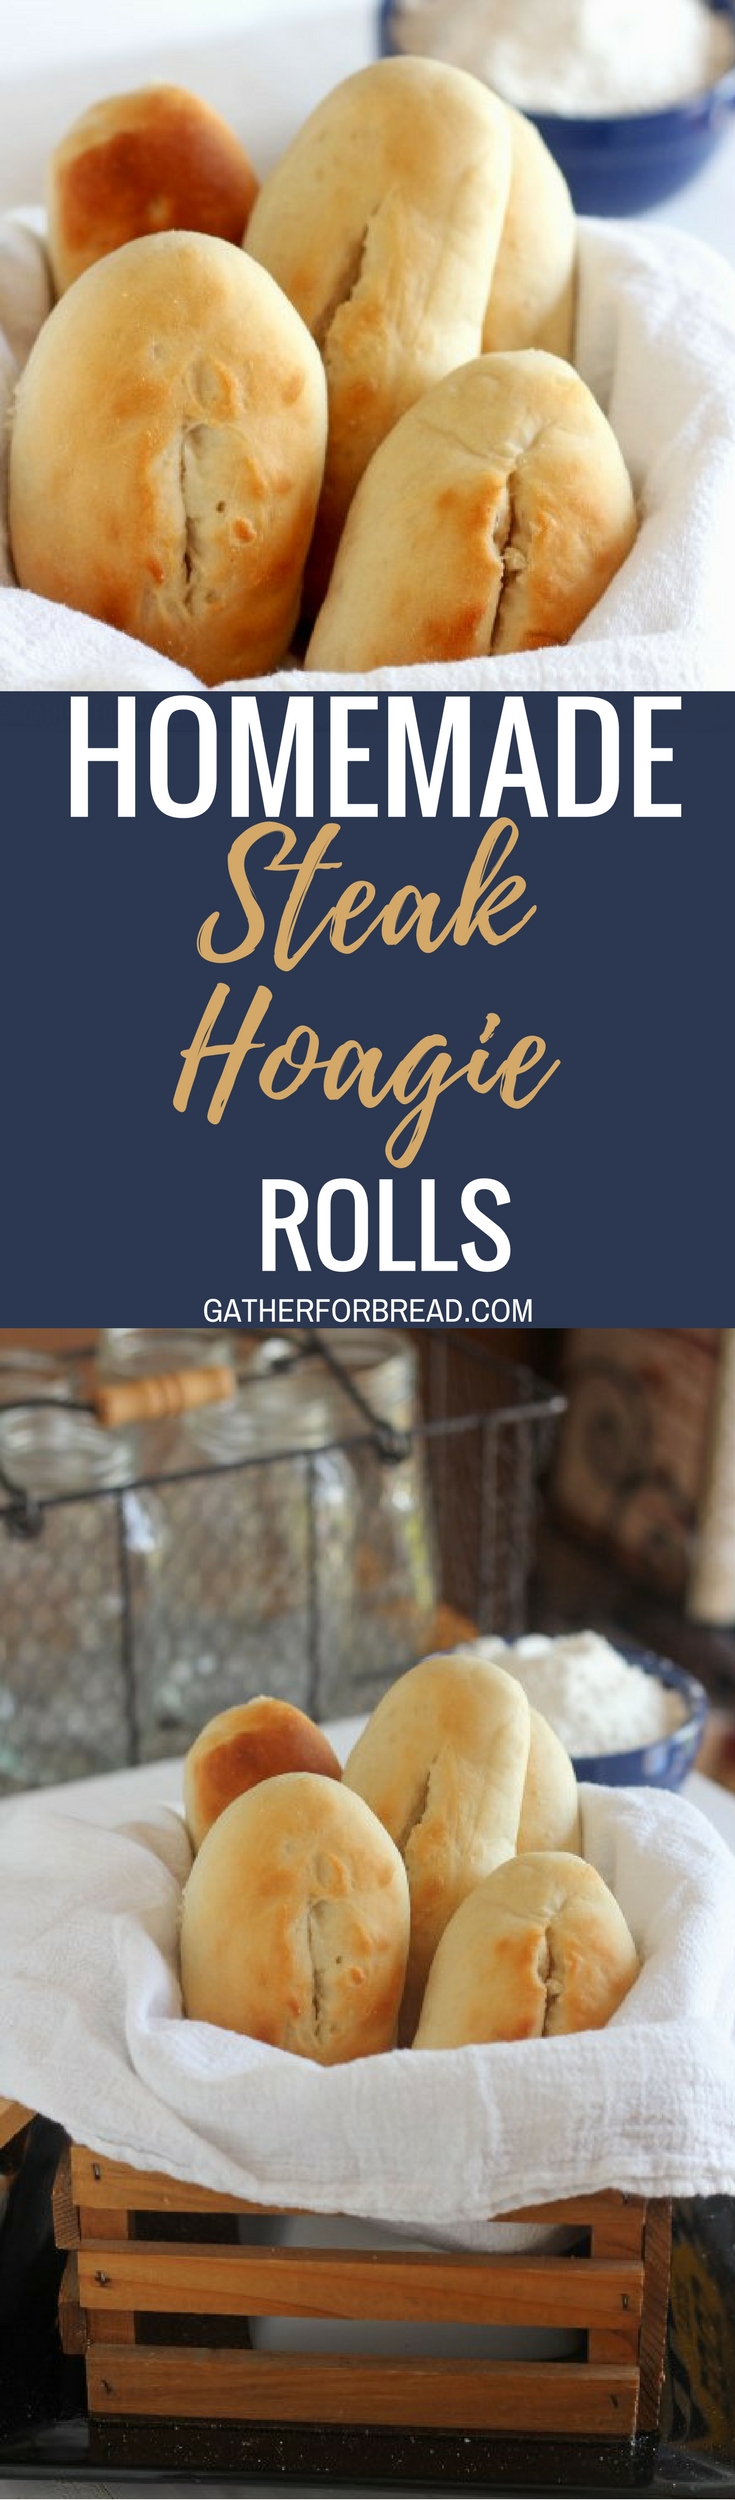 Steak Hoagie Rolls - Homemade soft, chewy roll for your Philly-style steak and hoagie sandwiches. Tender rolls that bake up beautifully. Stuff with your favorite meats or cheeses or slathered with butter. 